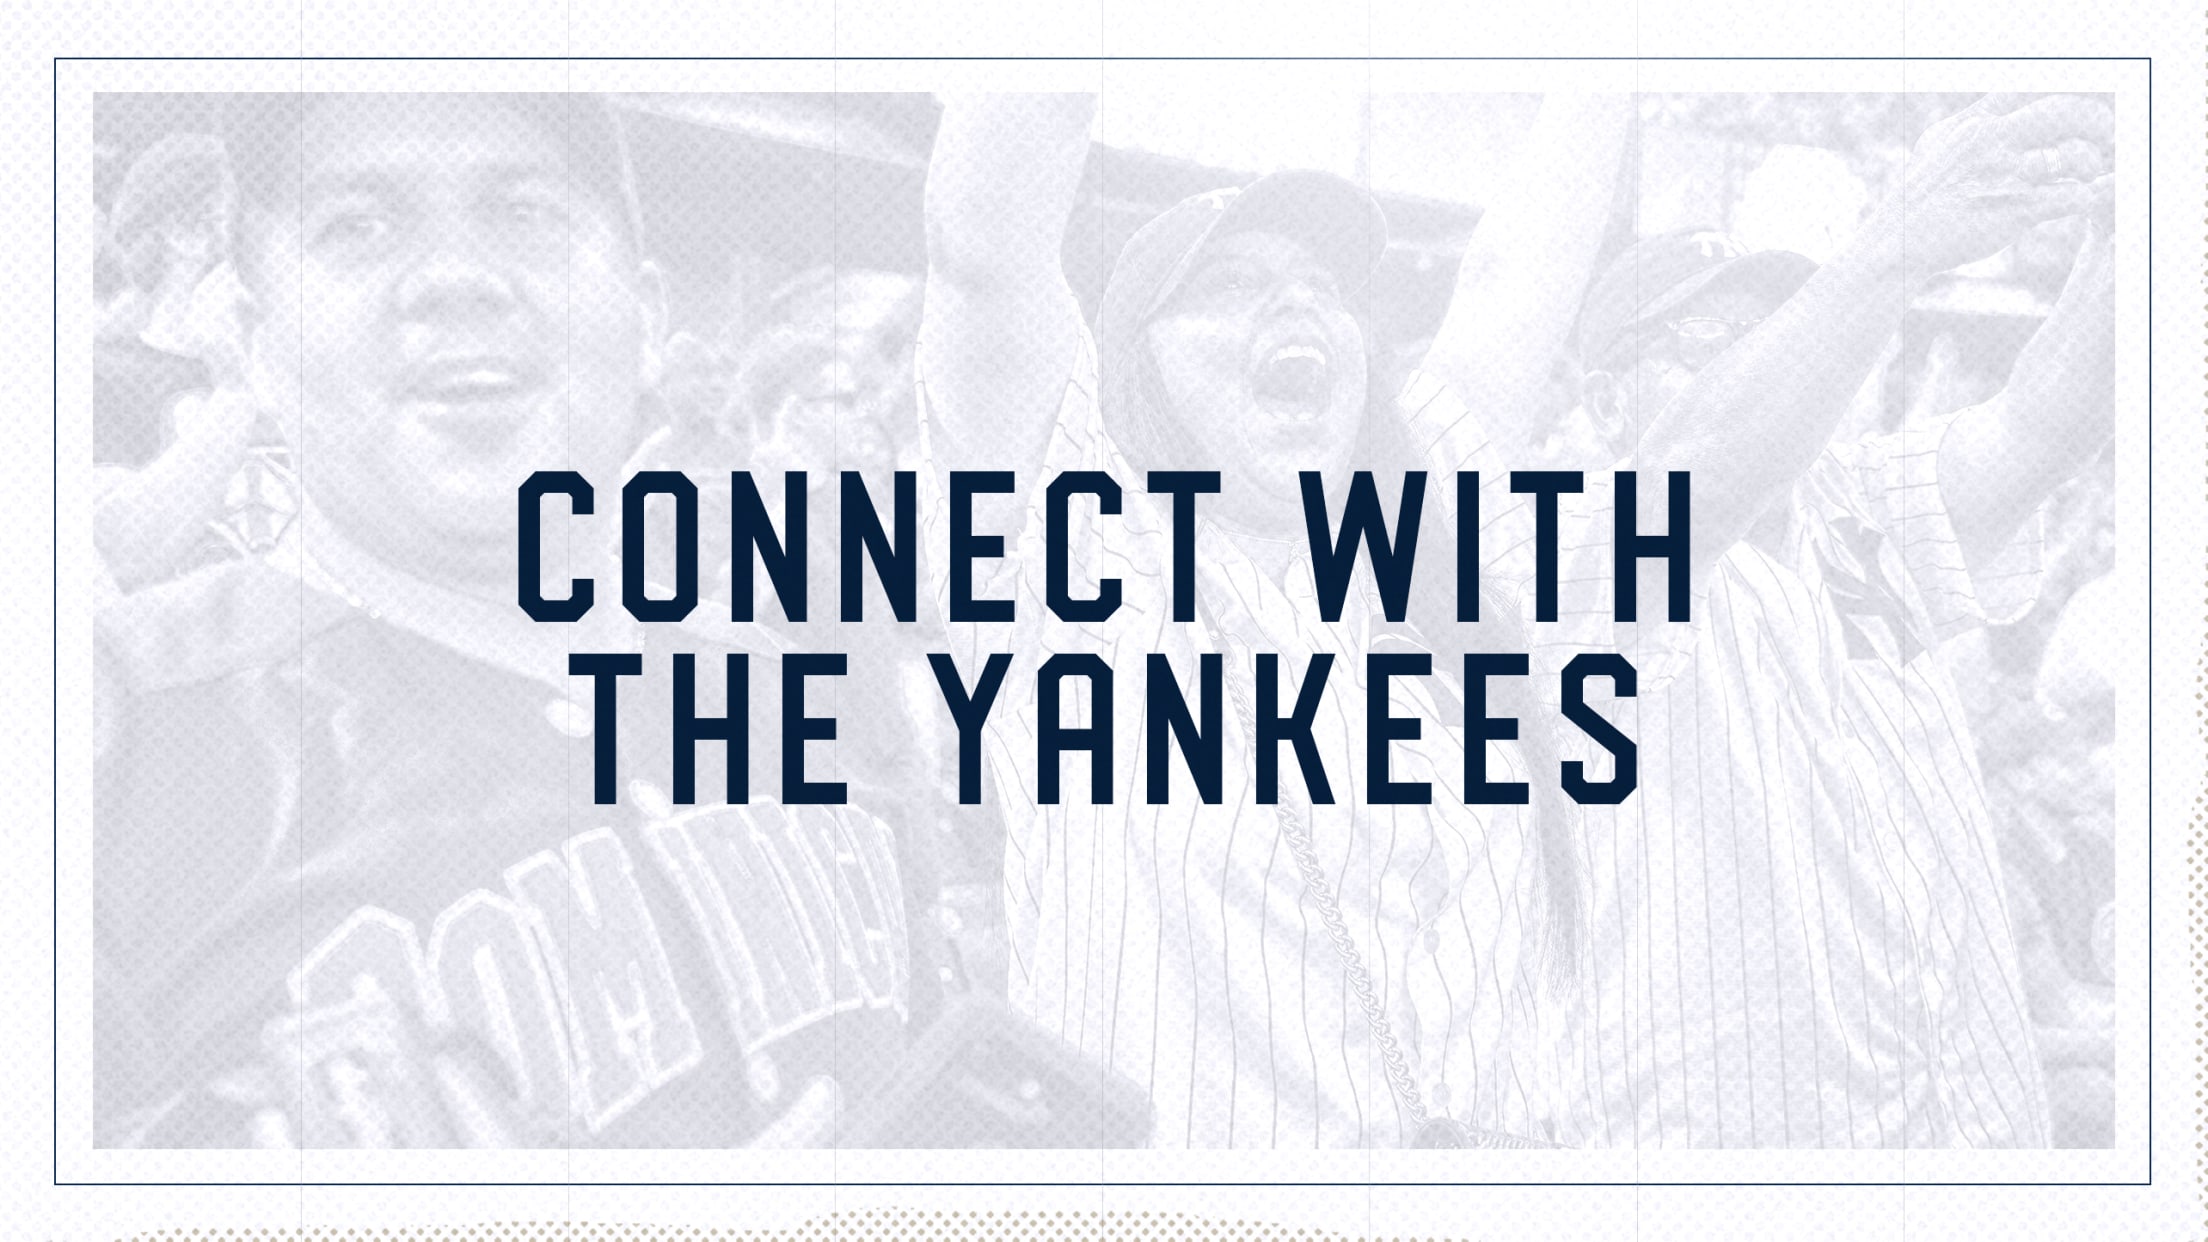 New York Yankees Fan Central